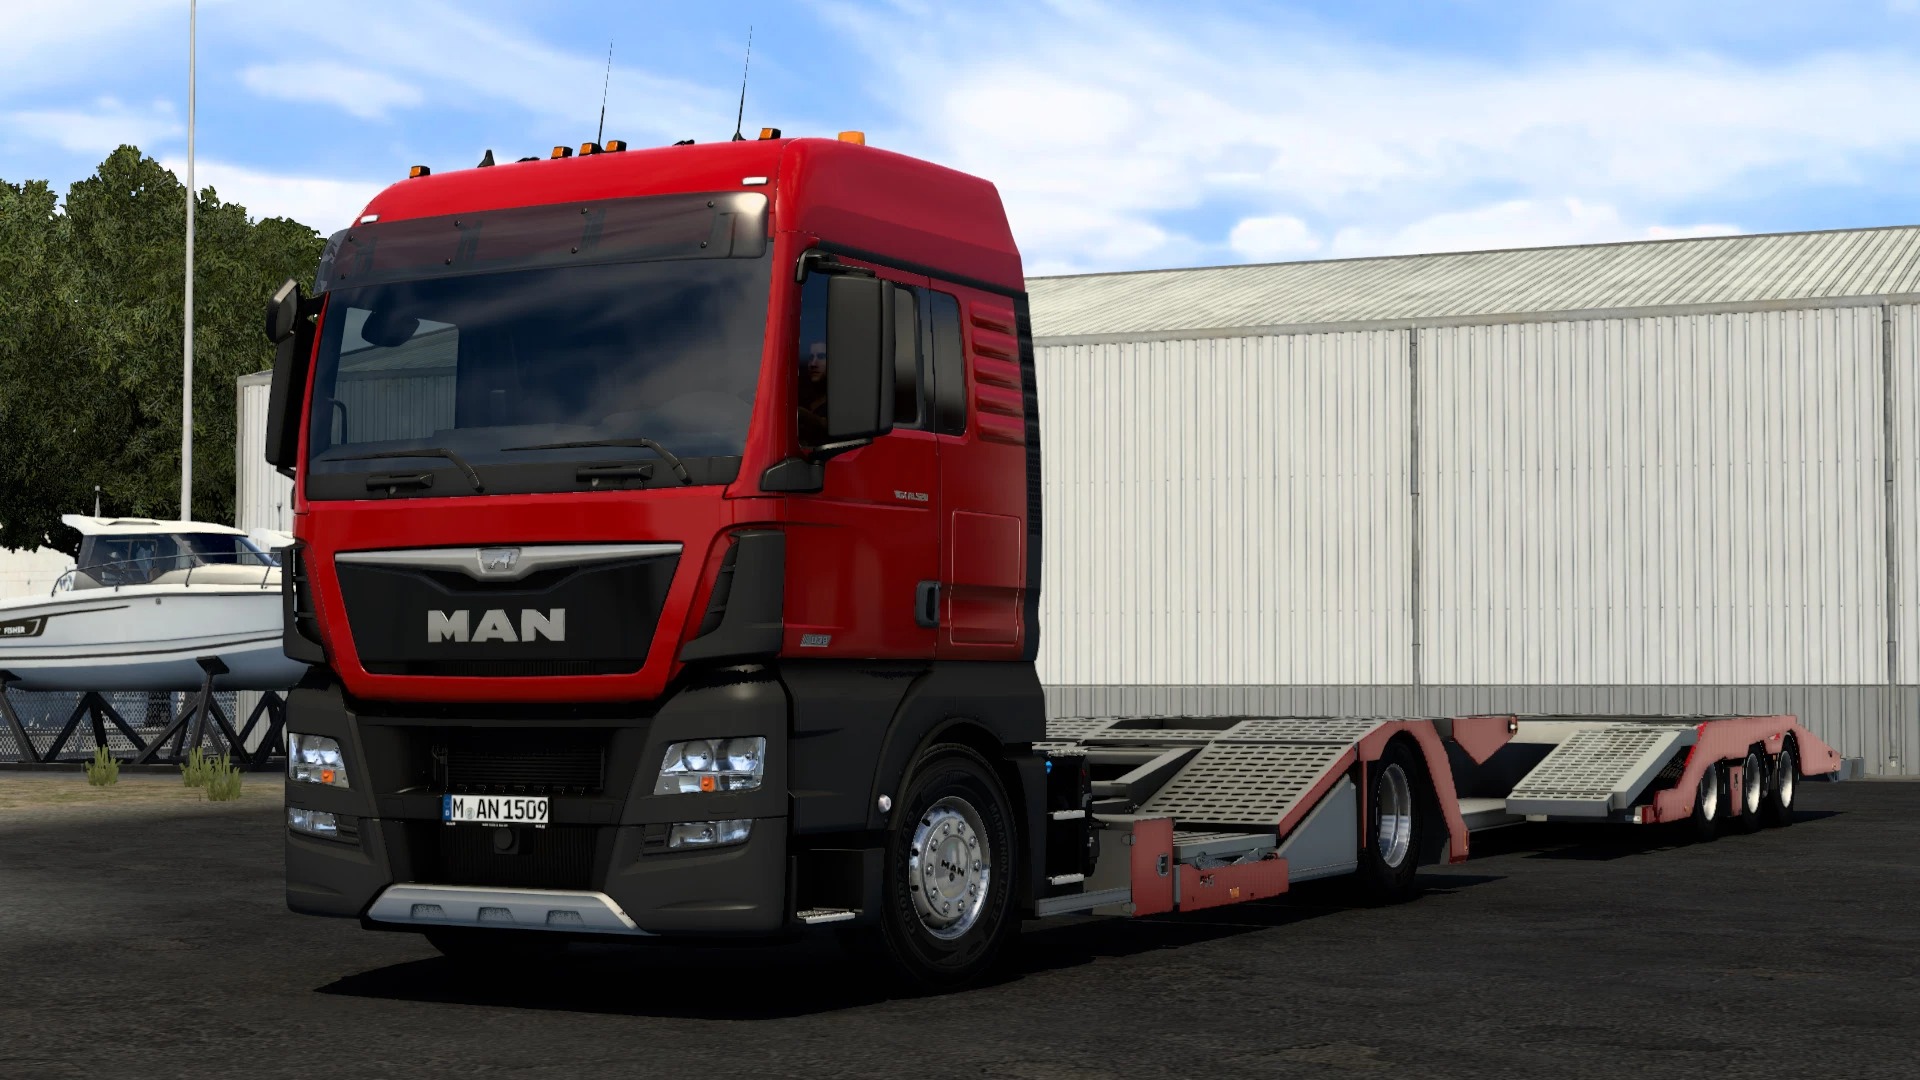 Man Tgx E6 By Gloover V19 147 Ets 2 Mods Ets2 Map Euro Truck Simulator 2 Mods Download 2502